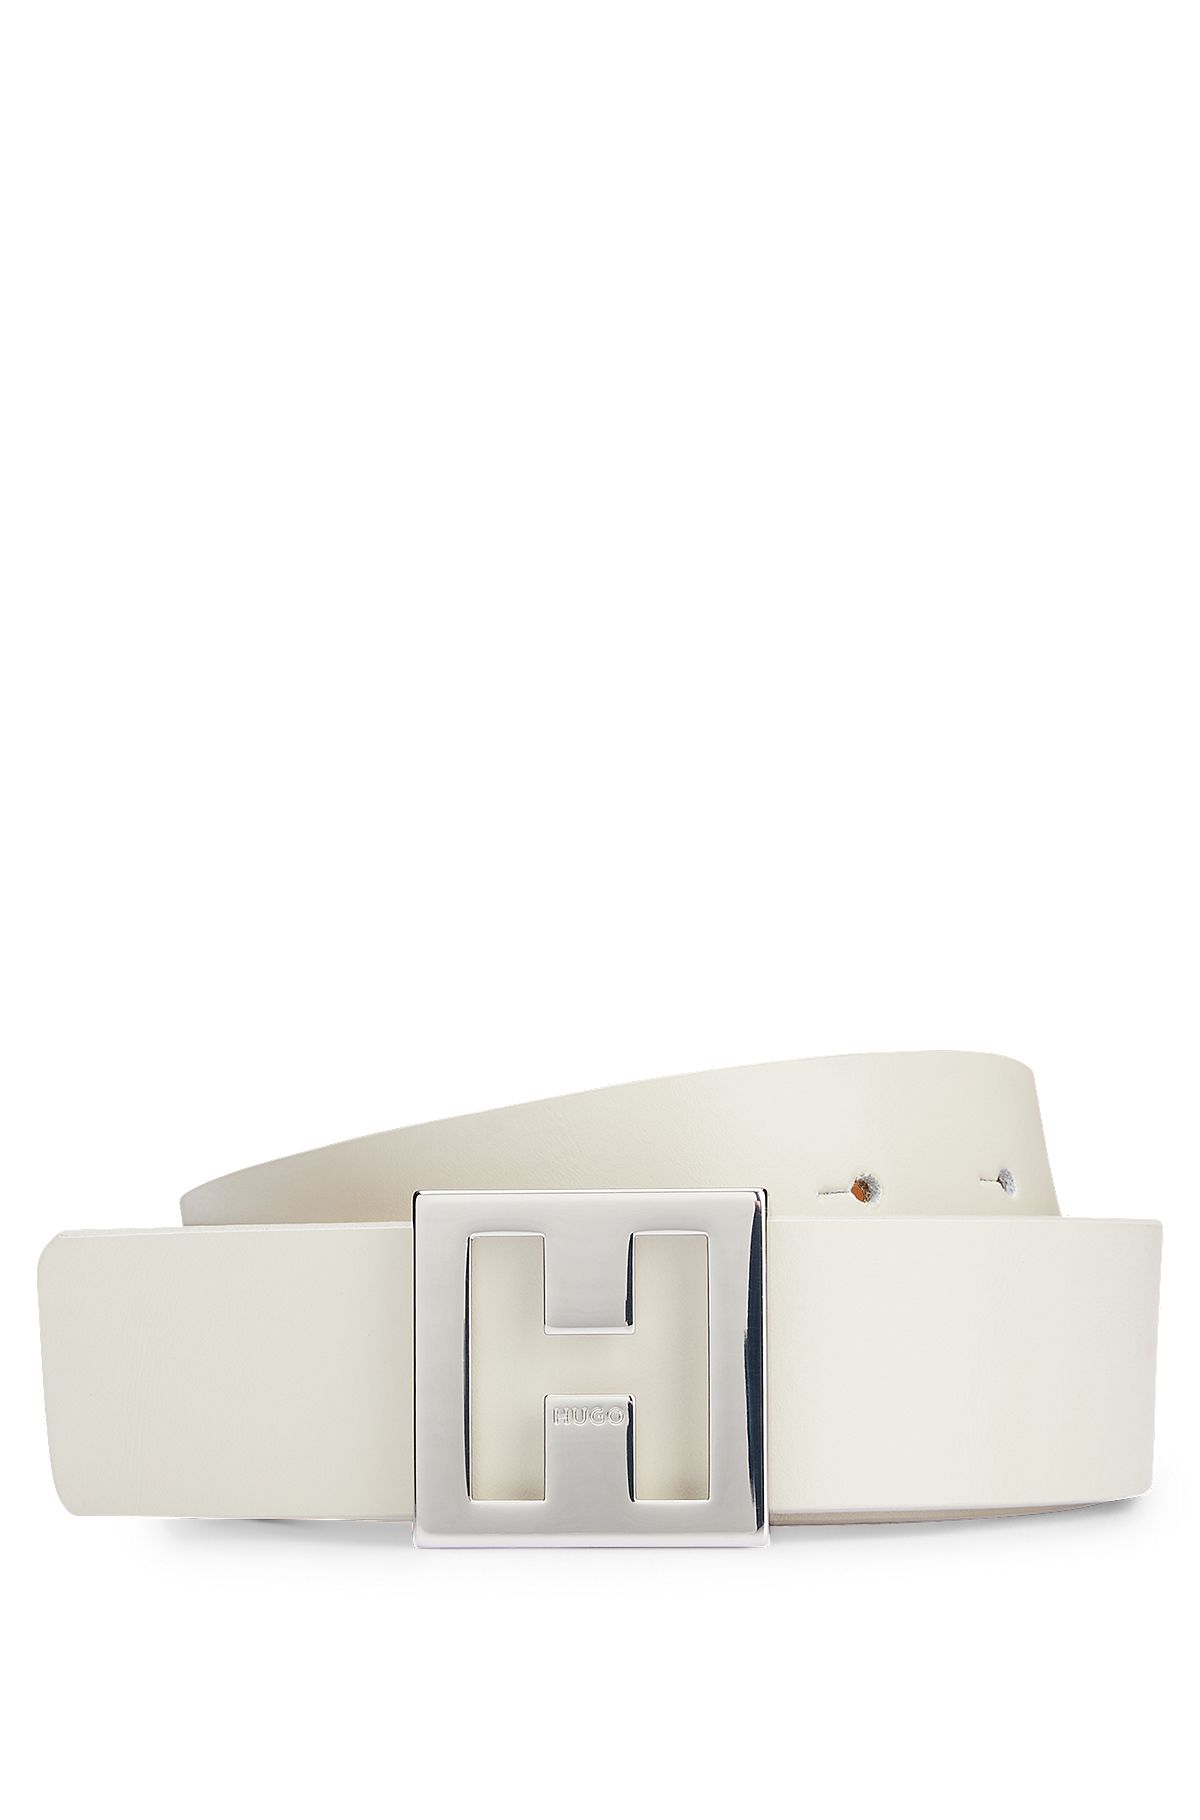 Reversible belt in Italian leather with monogram buckle, White